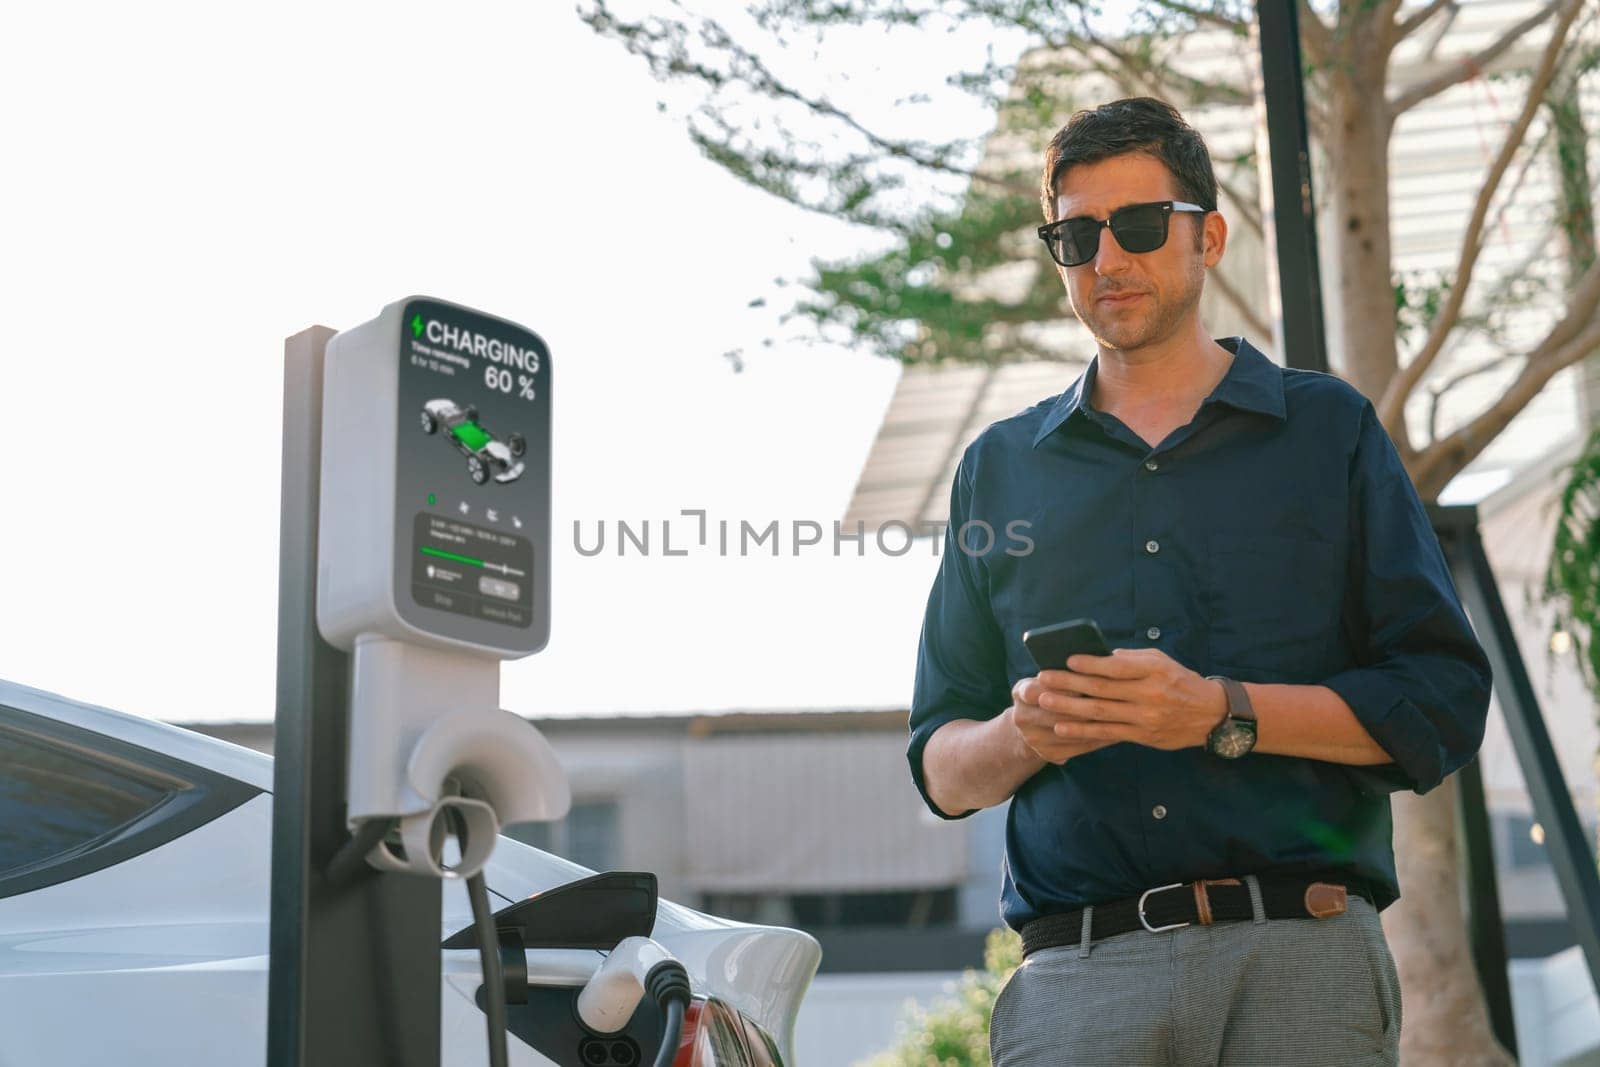 Young man use smartphone to pay for electricity at public EV car charging station at city commercial mall parking lot. Modern environmental and sustainable urban lifestyle with EV vehicle. Expedient